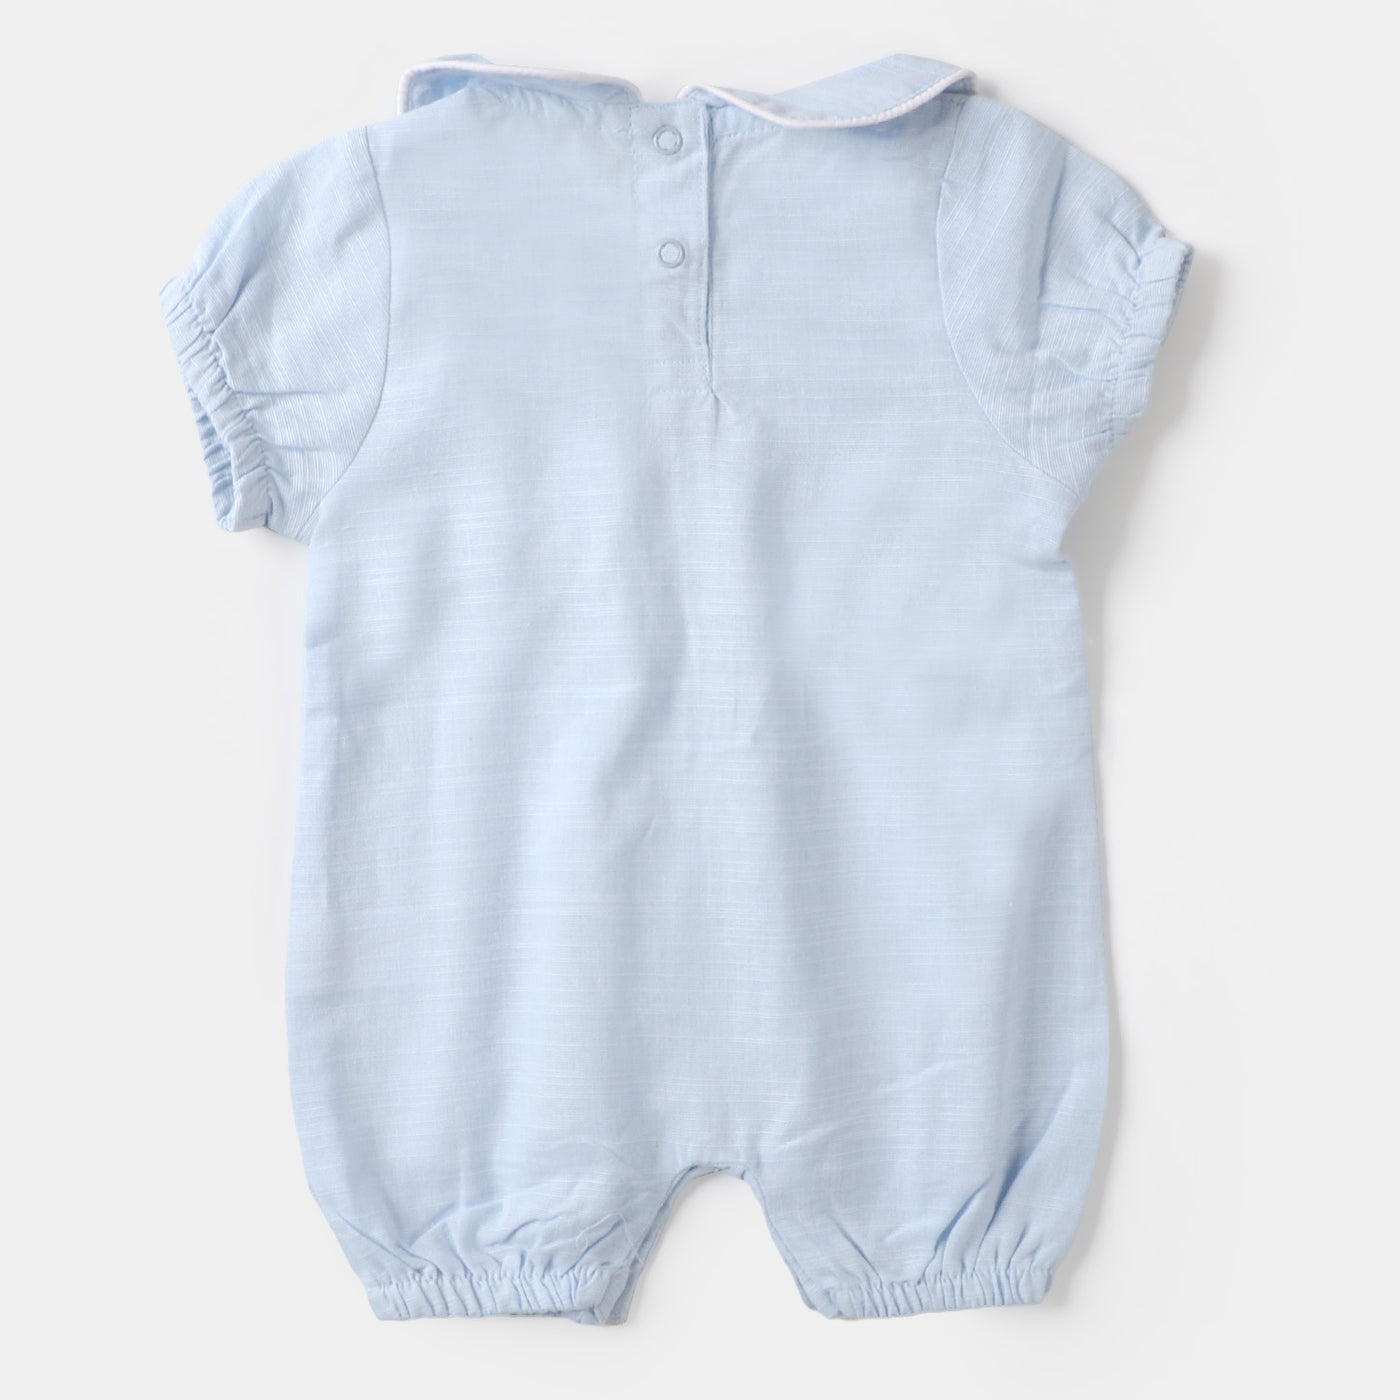 Infant Girls Woven Romper Lace Buttons - SKY BLUE